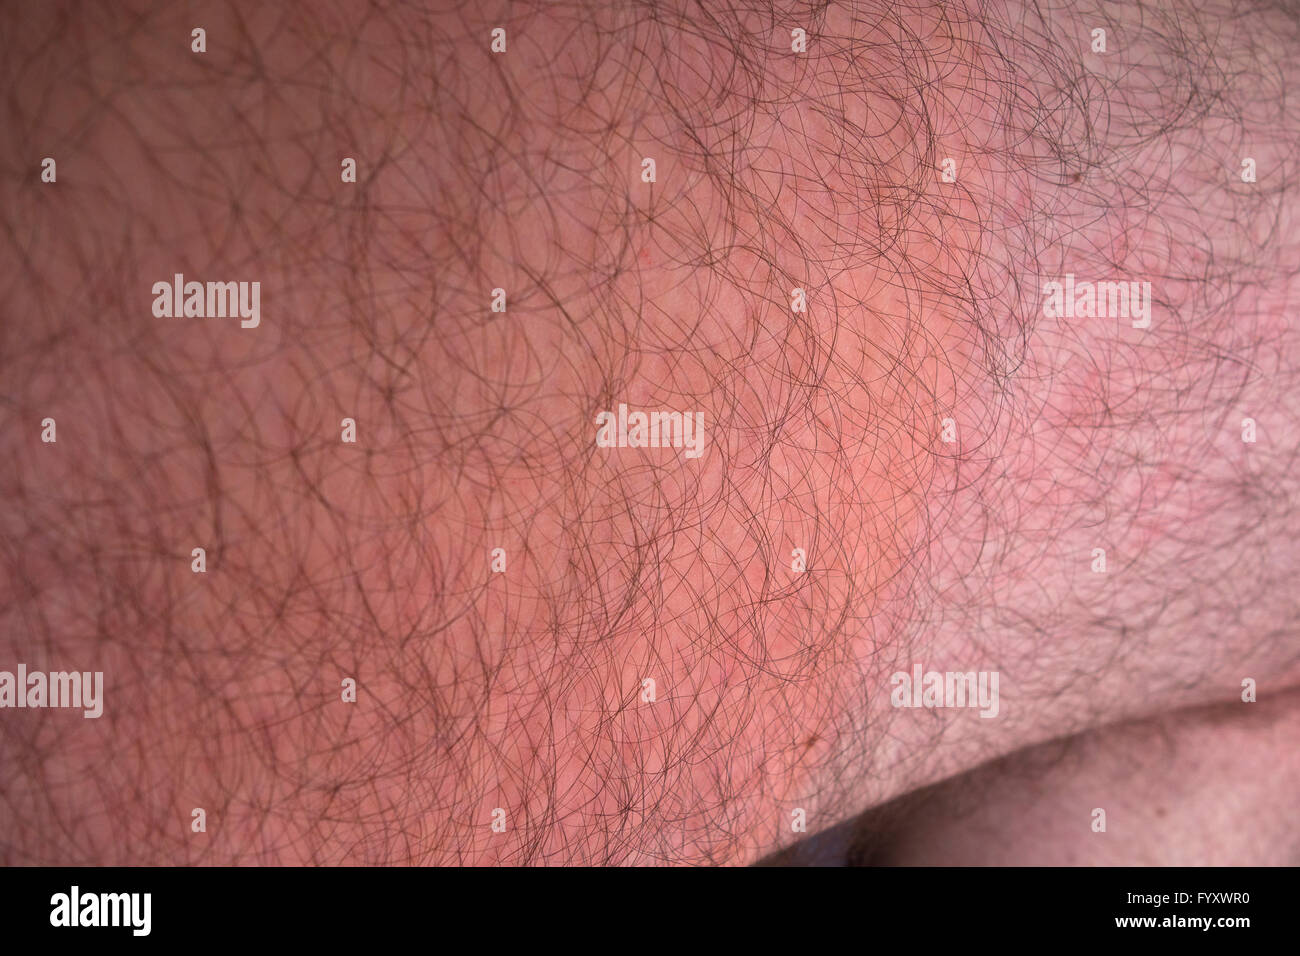 Urticaria on upper thigh of middle-aged man after outdoor exercise in cold 0°C temperature (clothing thinner on upper leg) Stock Photo